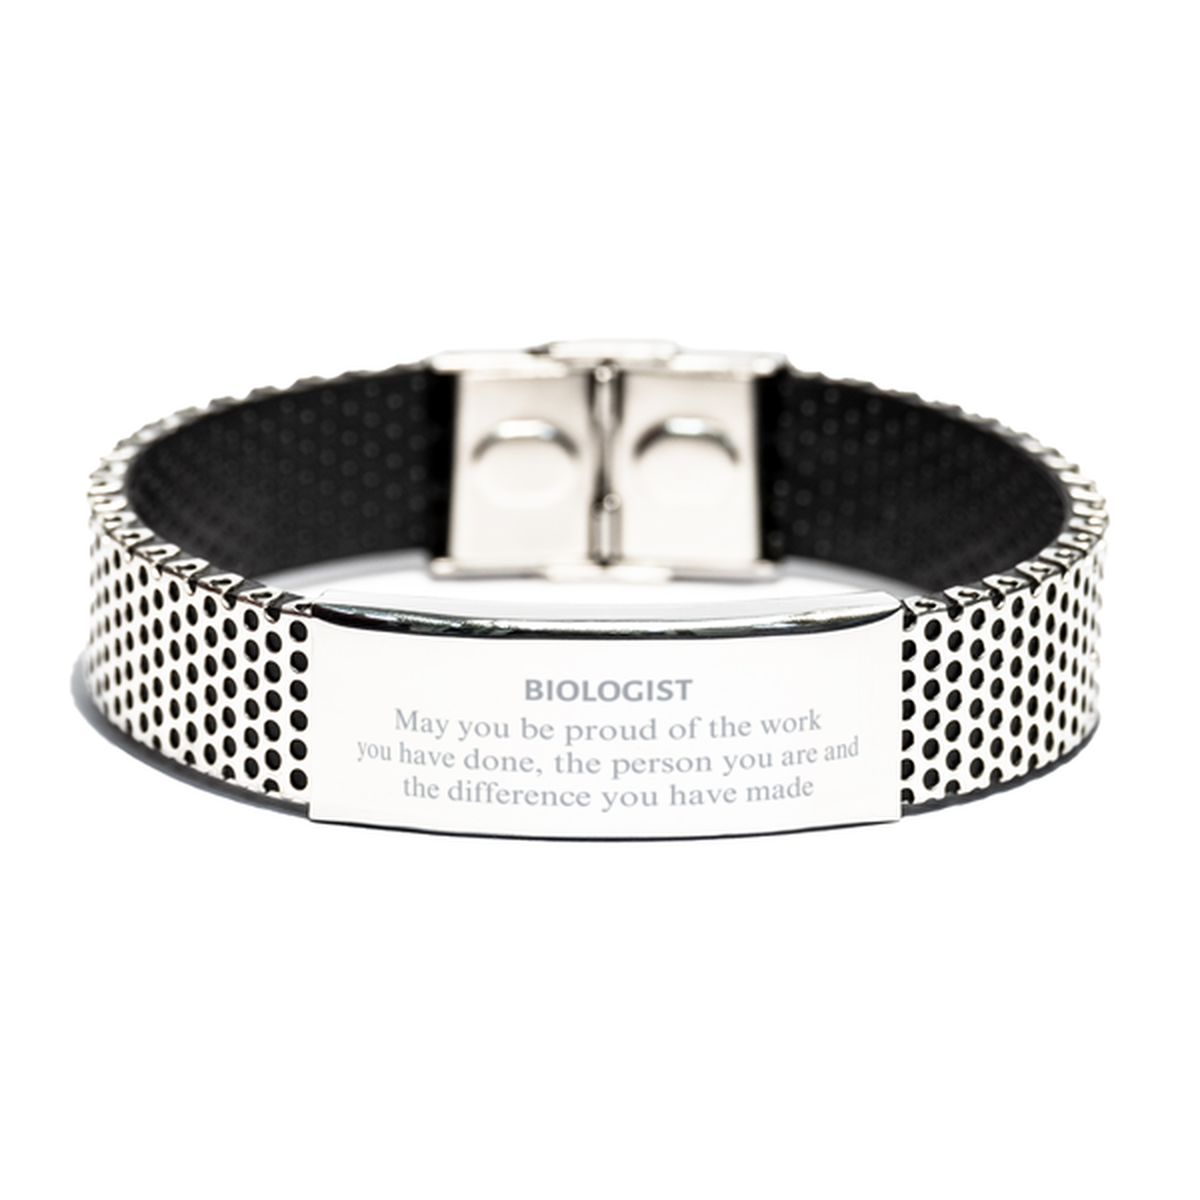 Biologist May you be proud of the work you have done, Retirement Biologist Stainless Steel Bracelet for Colleague Appreciation Gifts Amazing for Biologist